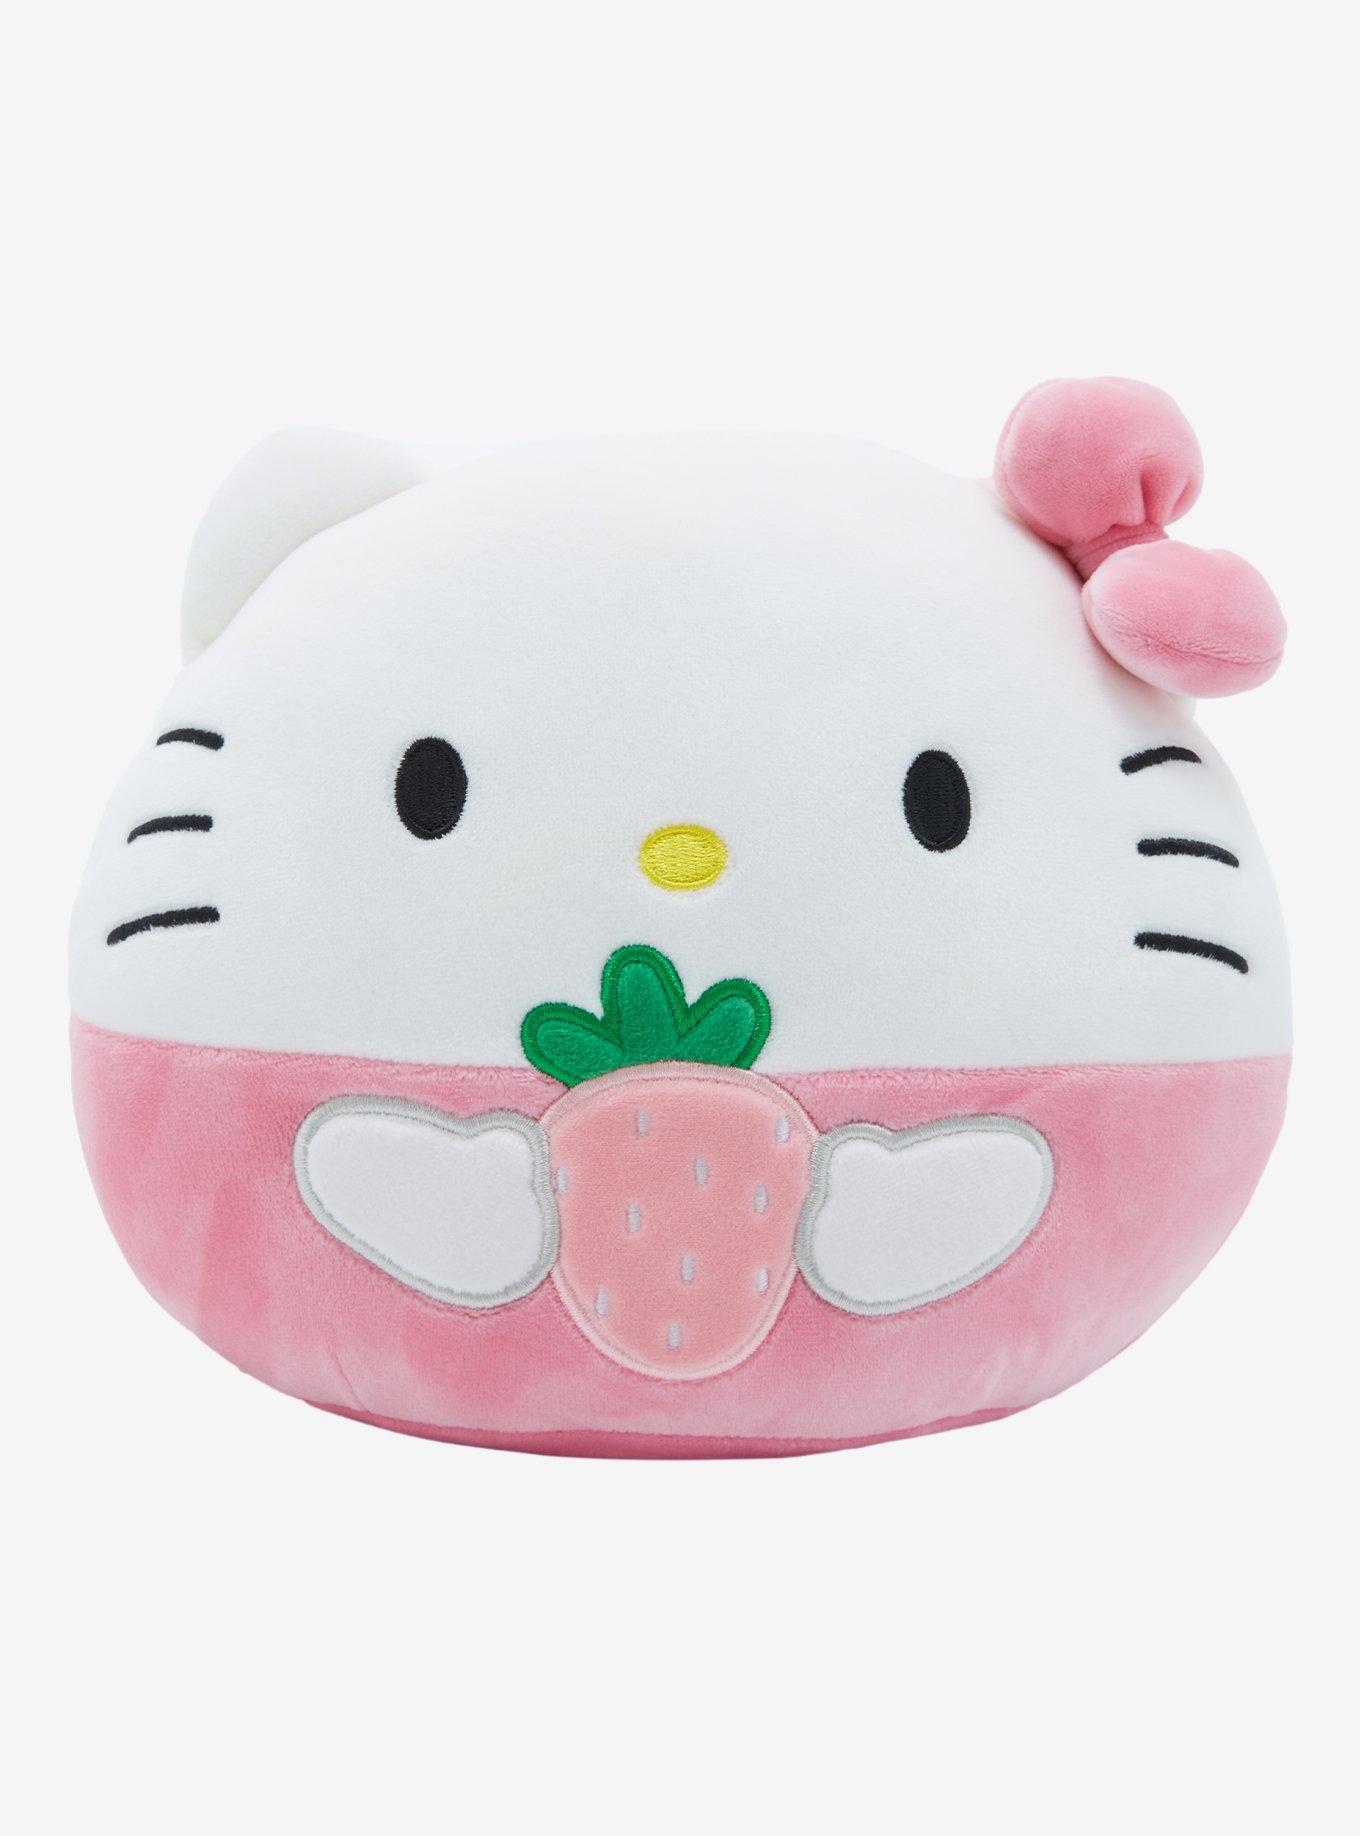 Hello Kitty Squishy Toy Hot Topic Exclusive